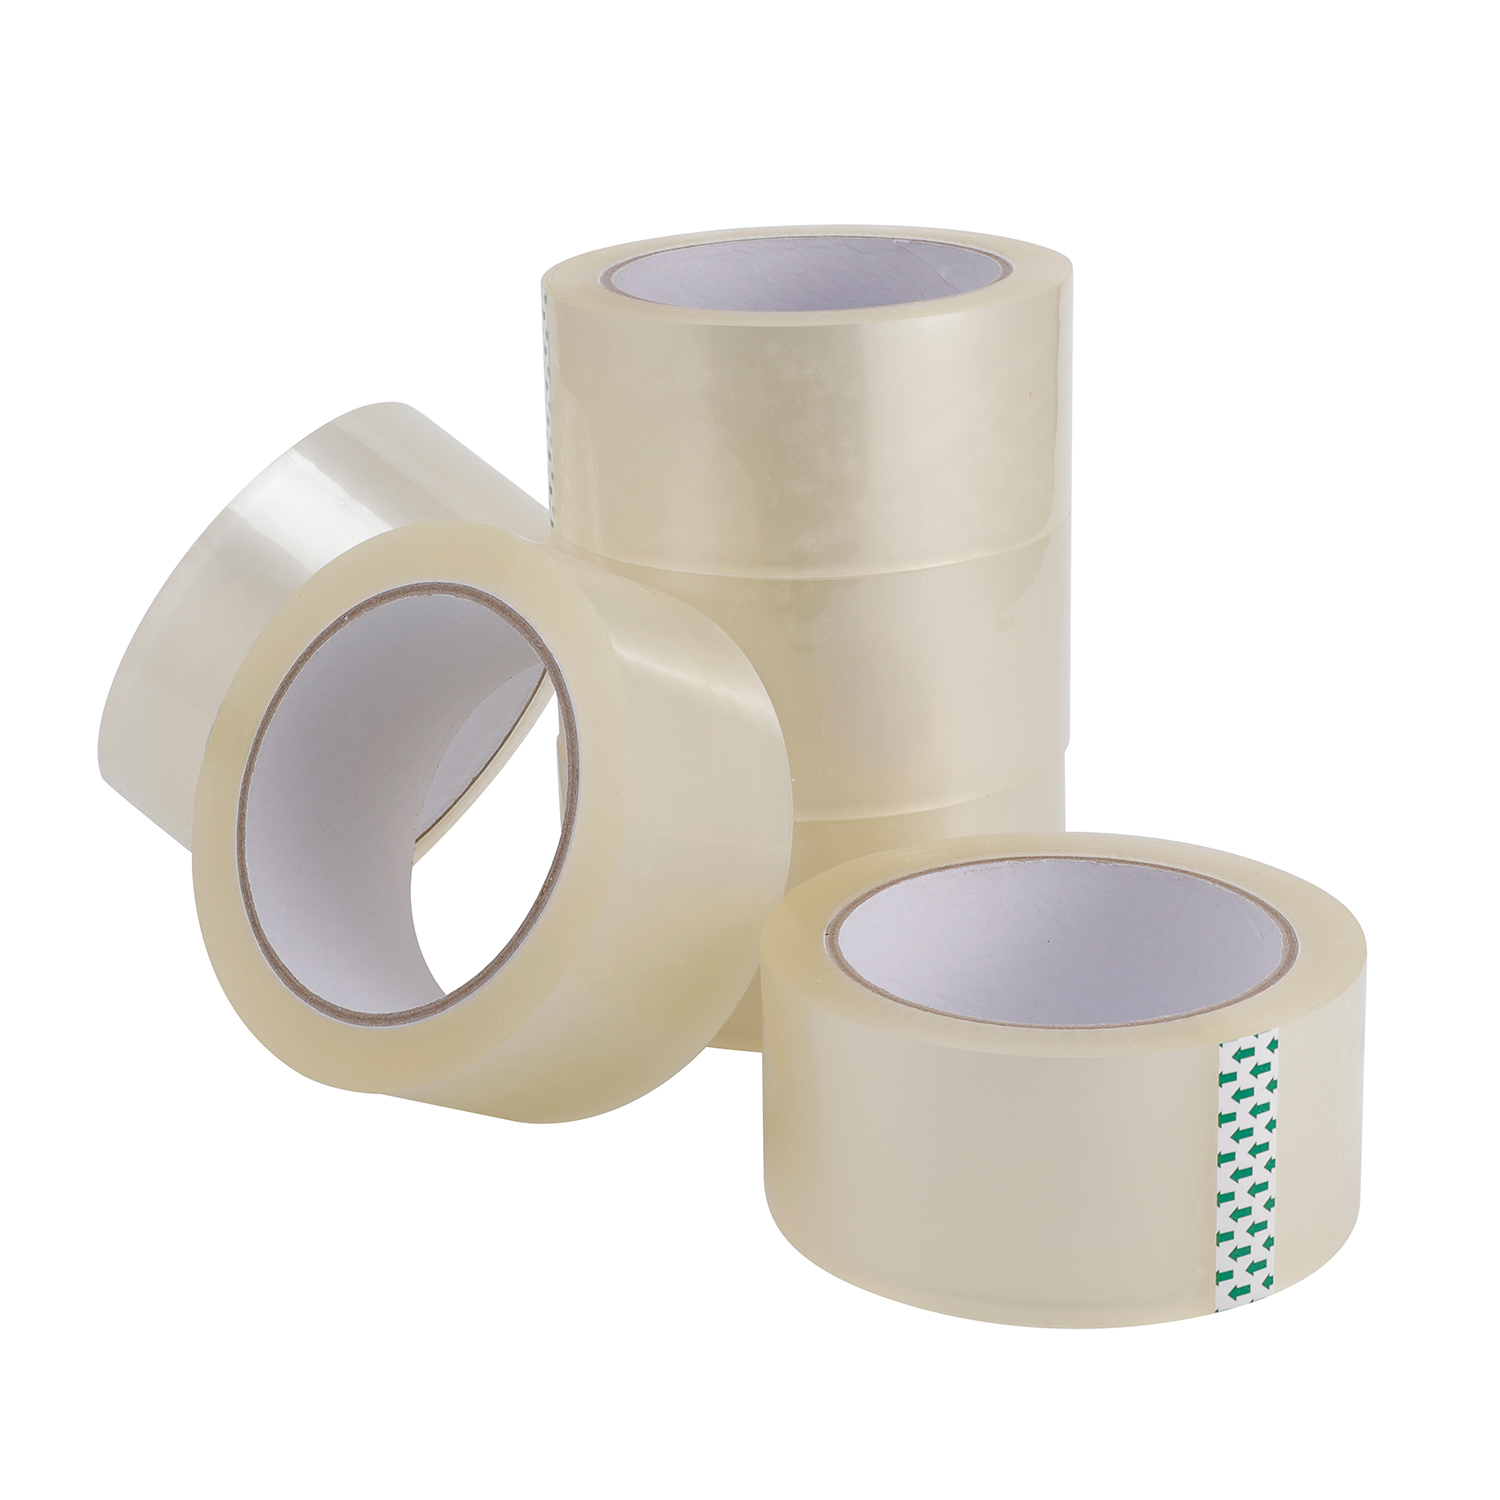 36 Rolls Adhesive Clear Packaging Sealing Tape 48mm x 75m